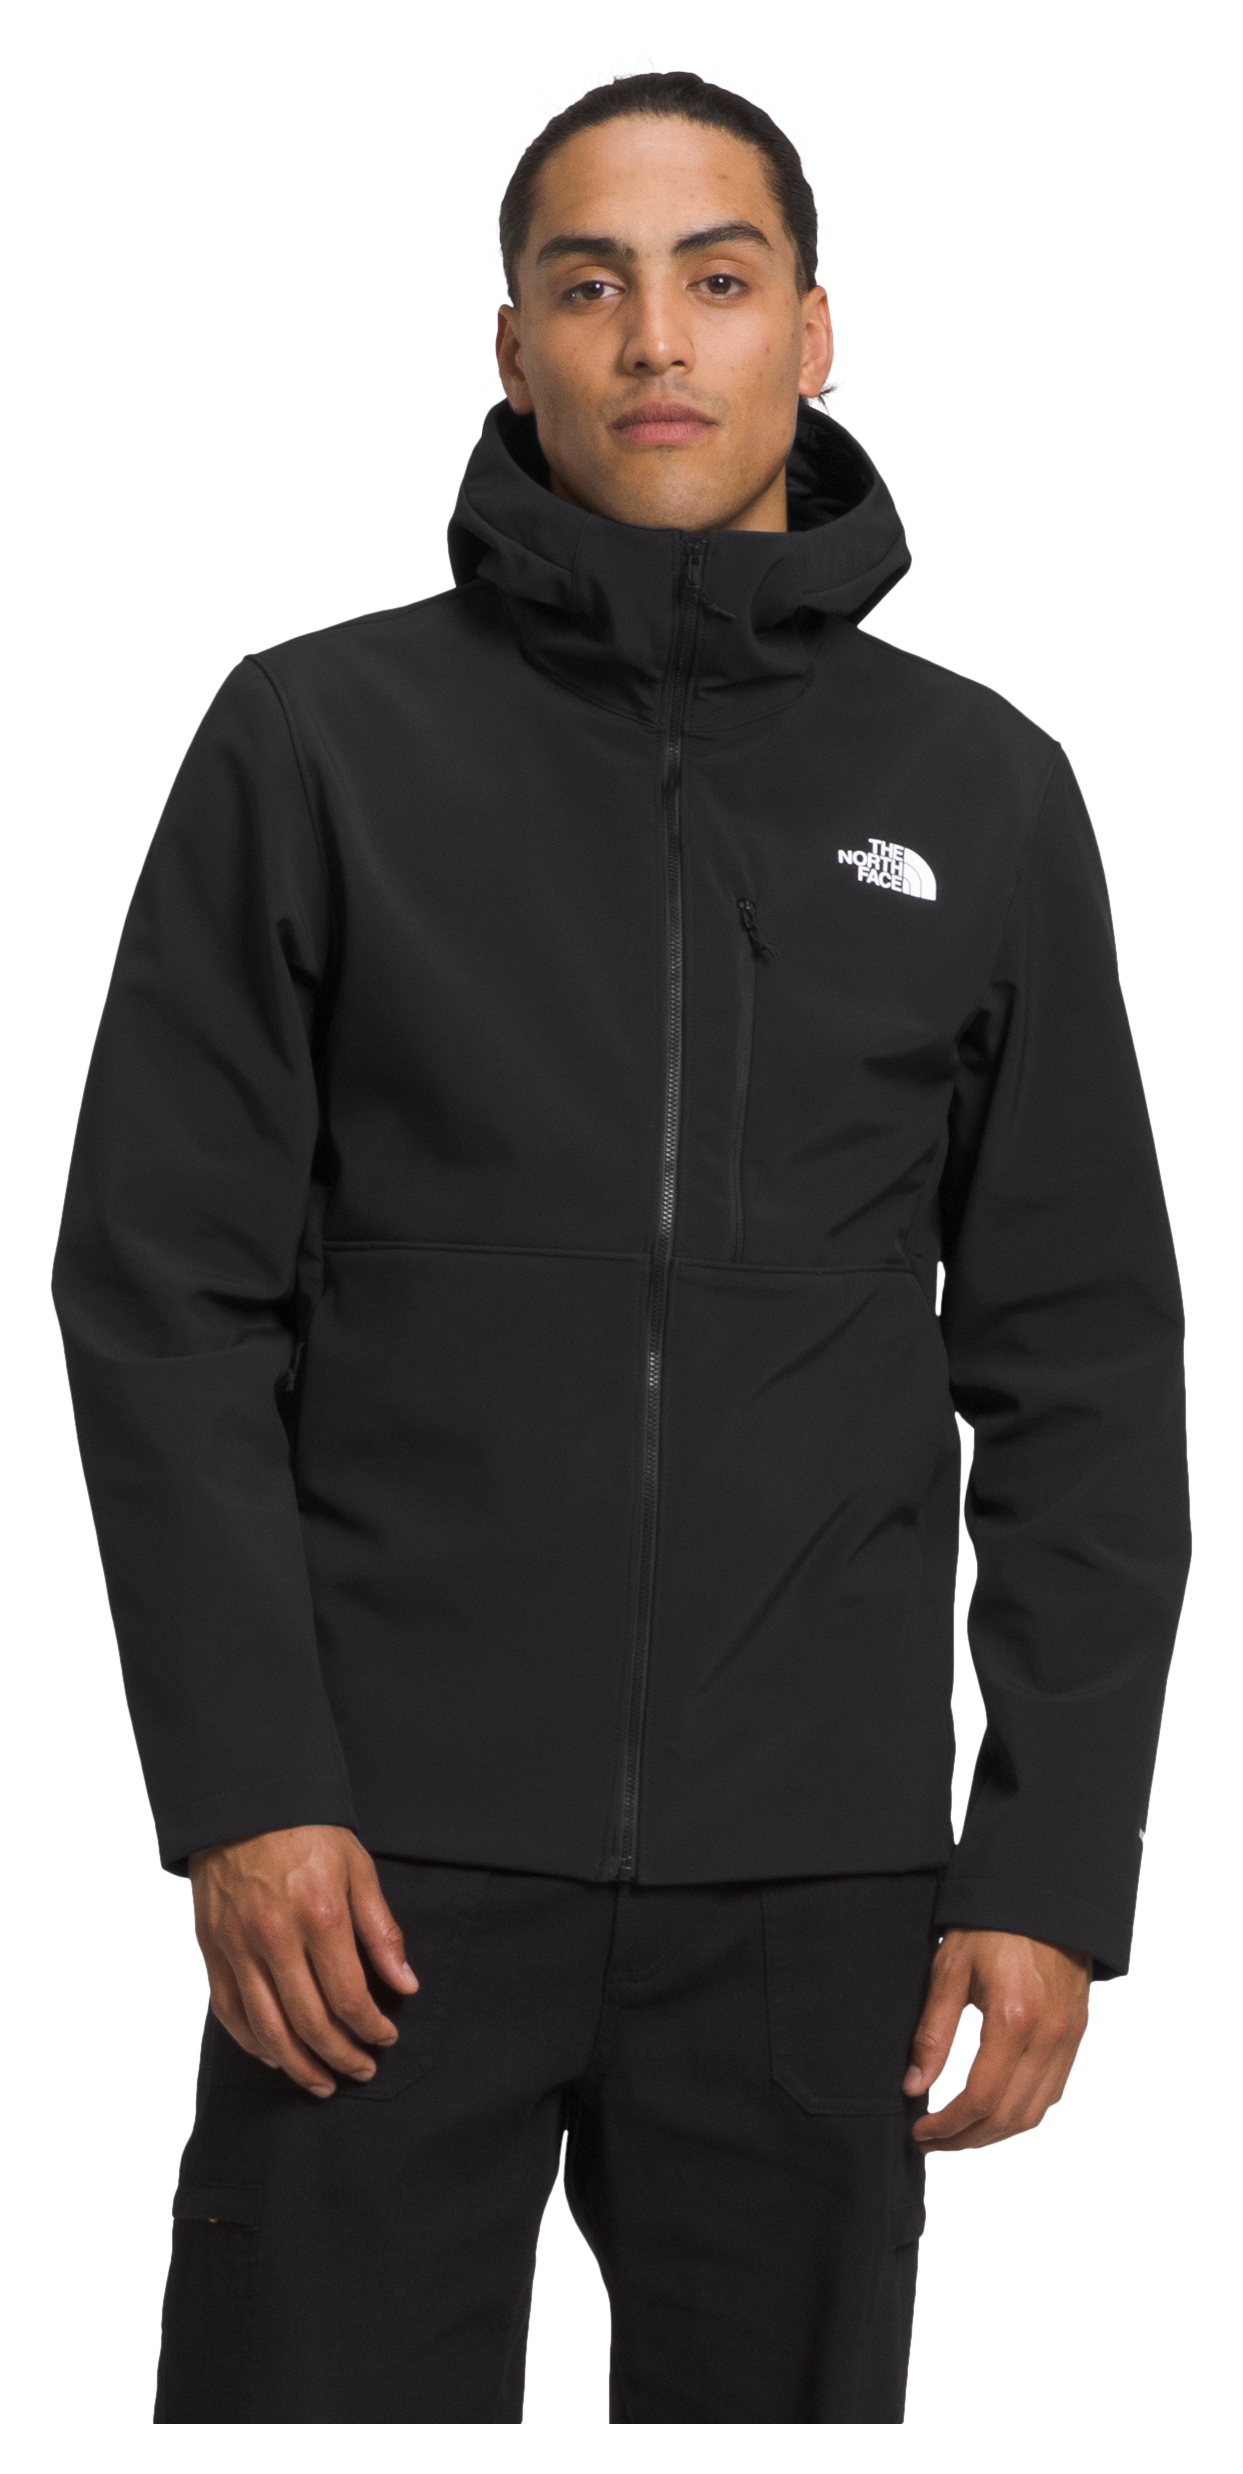 The North Face Apex Bionic 3 Hooded Jacket for Men - TNF Black - 2XL